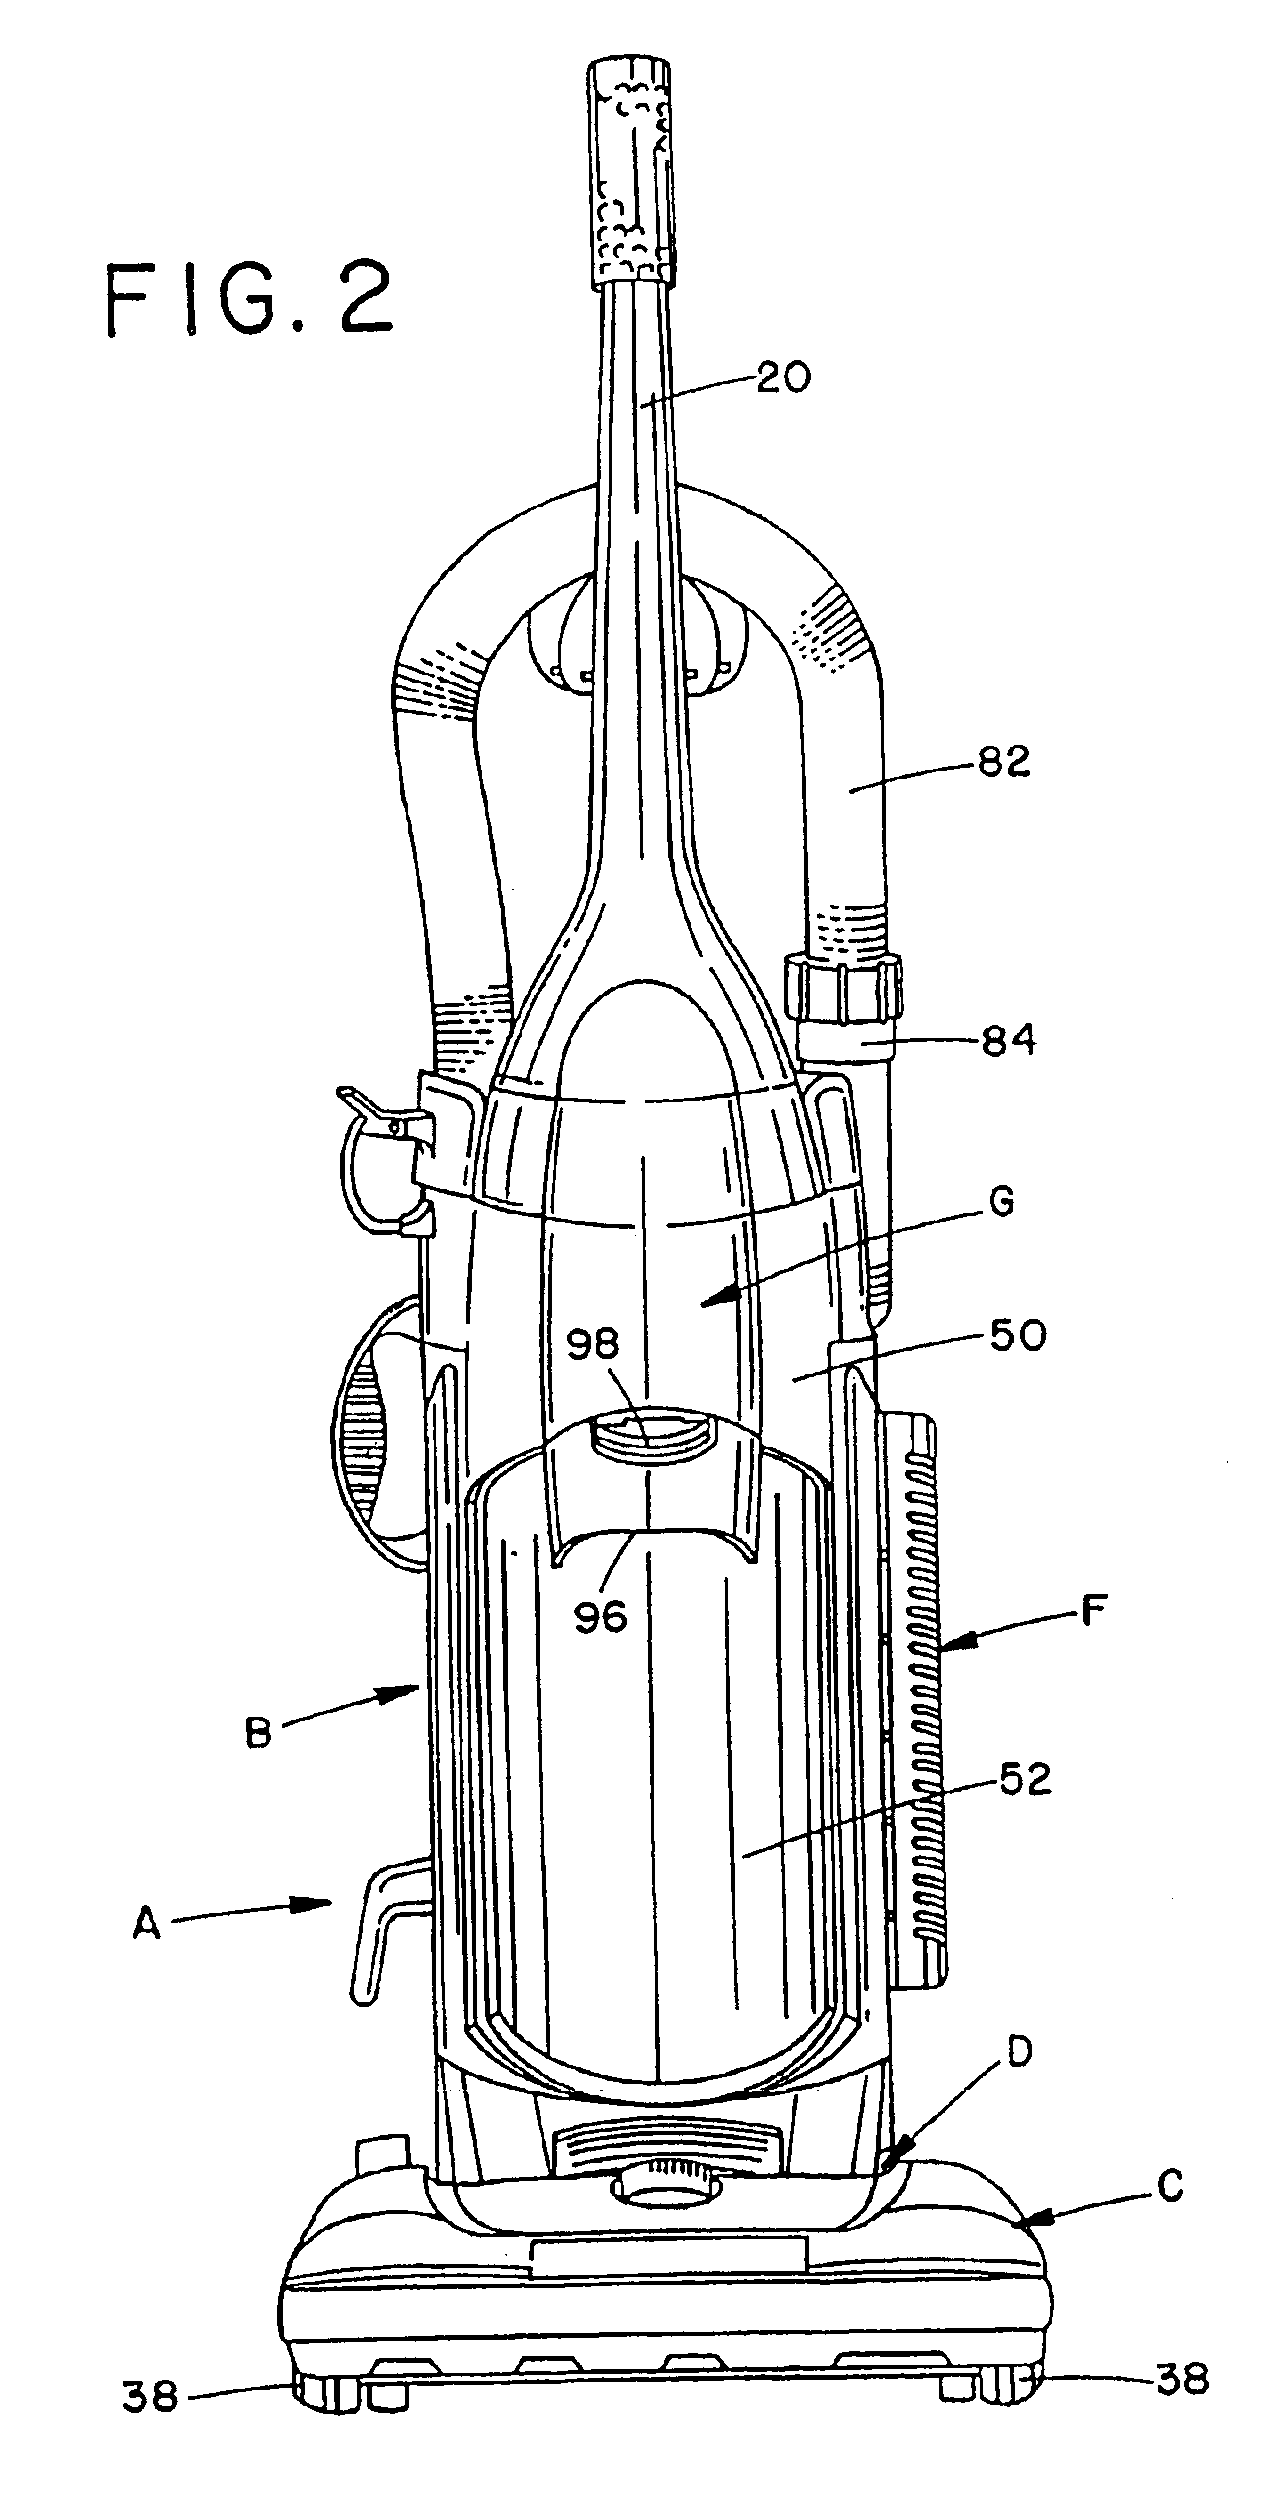 Upright vacuum cleaner with cyclonic airflow